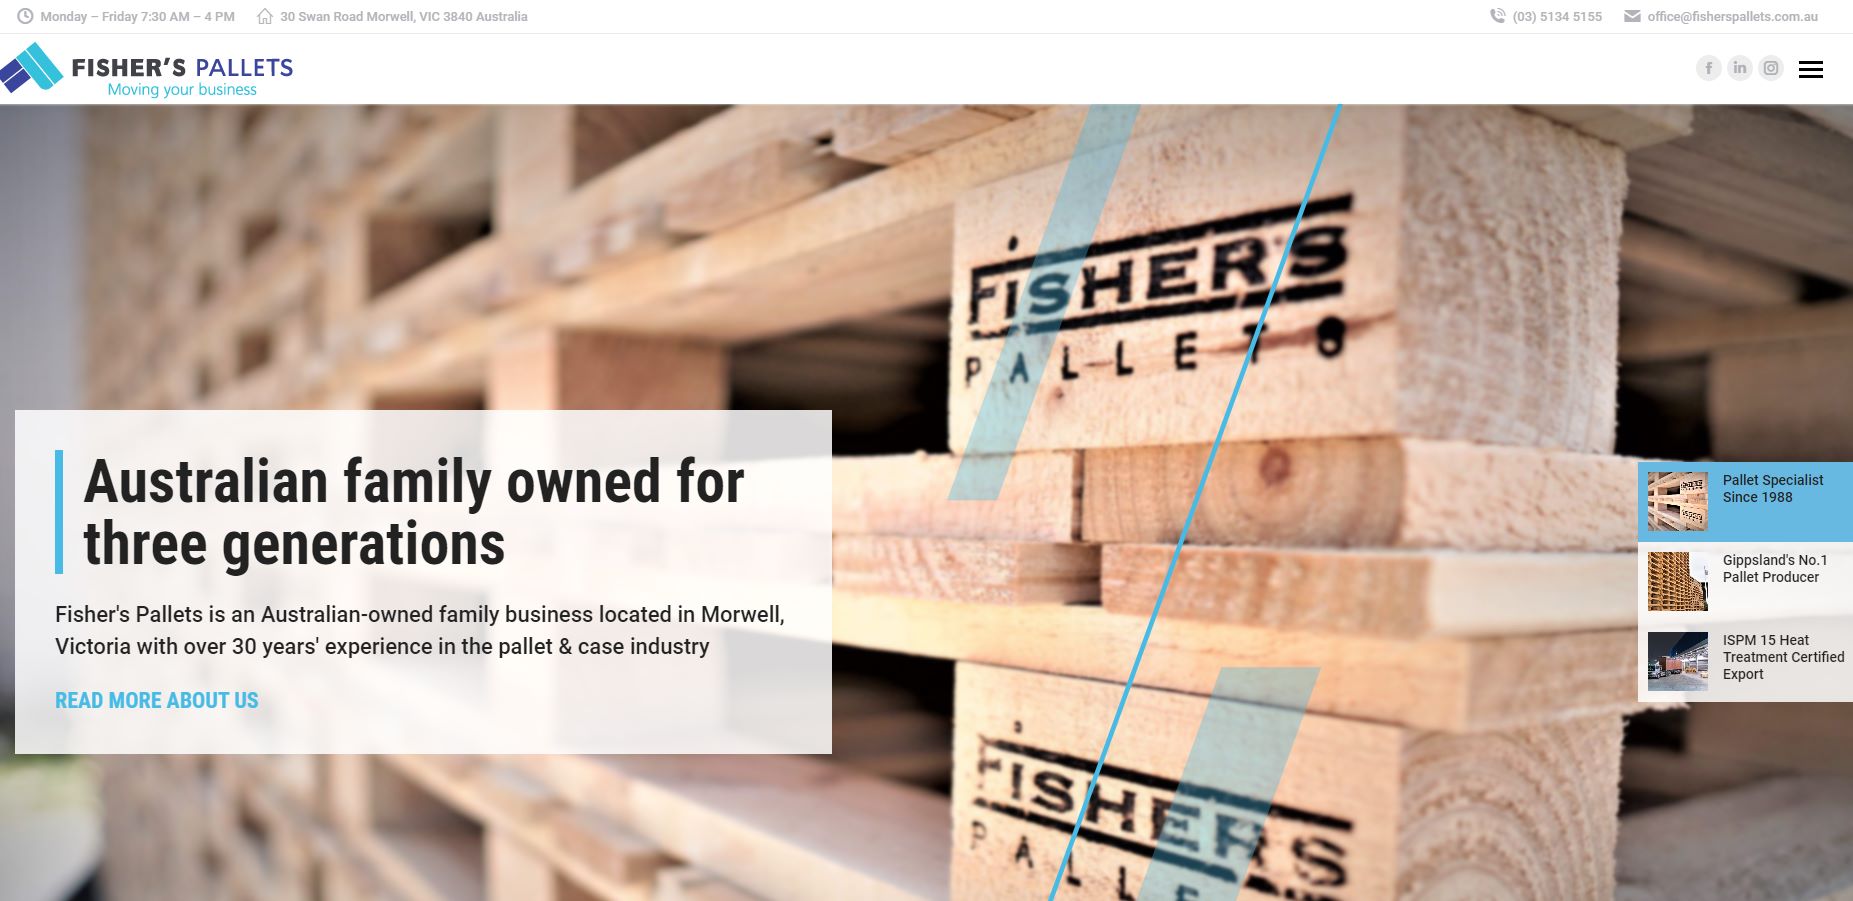 fishers pallets